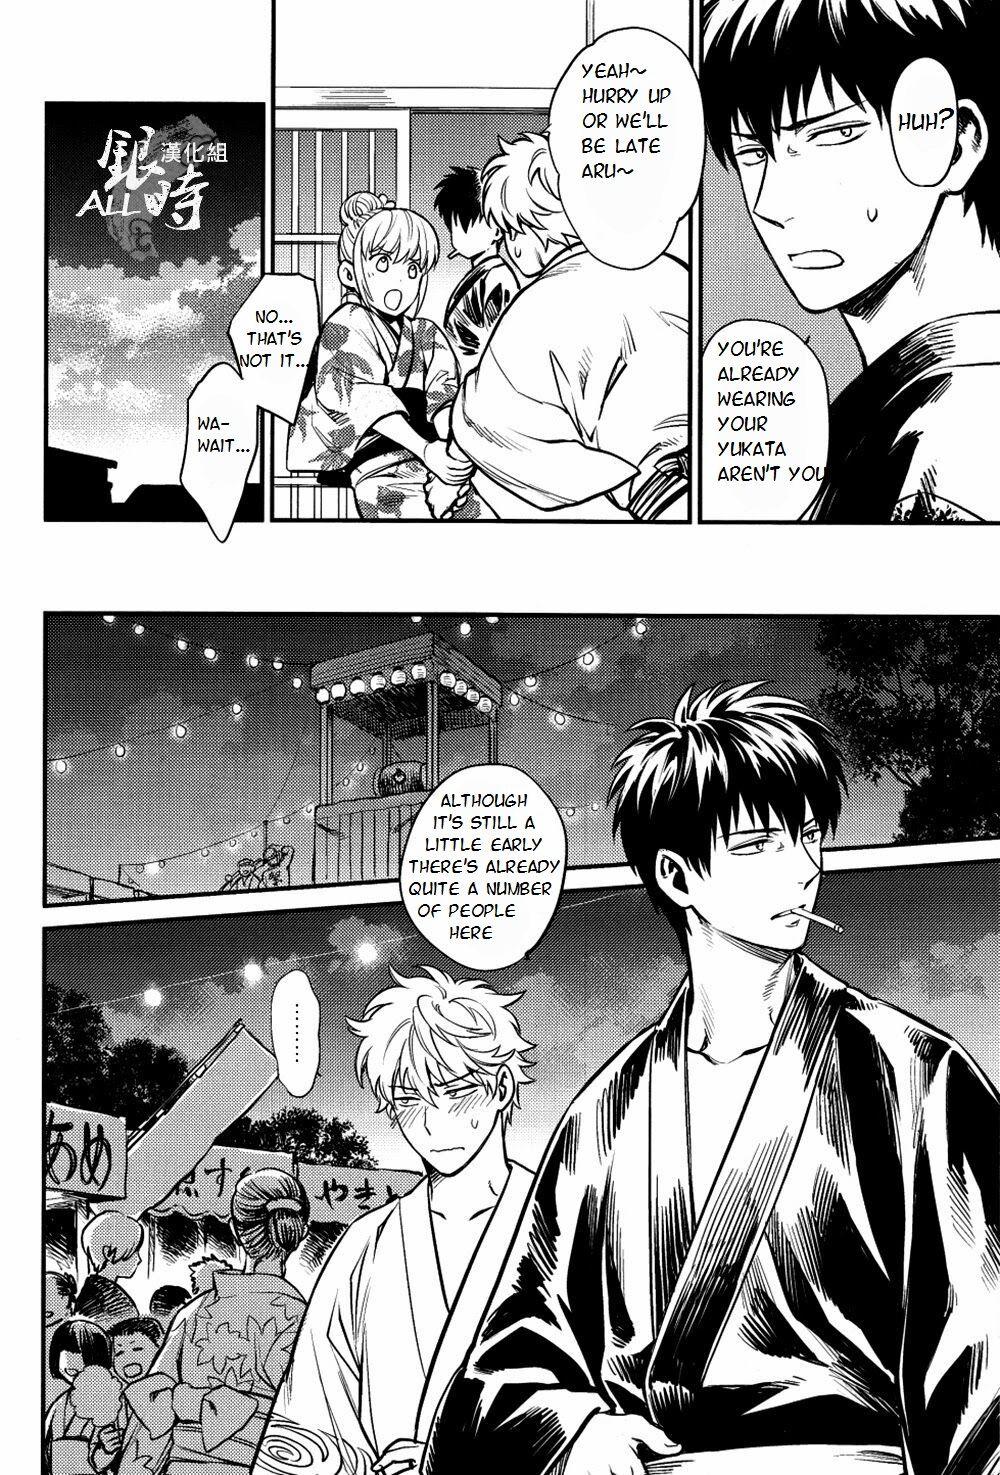 Swinger Please! Gintoki - Gintama And - Page 9